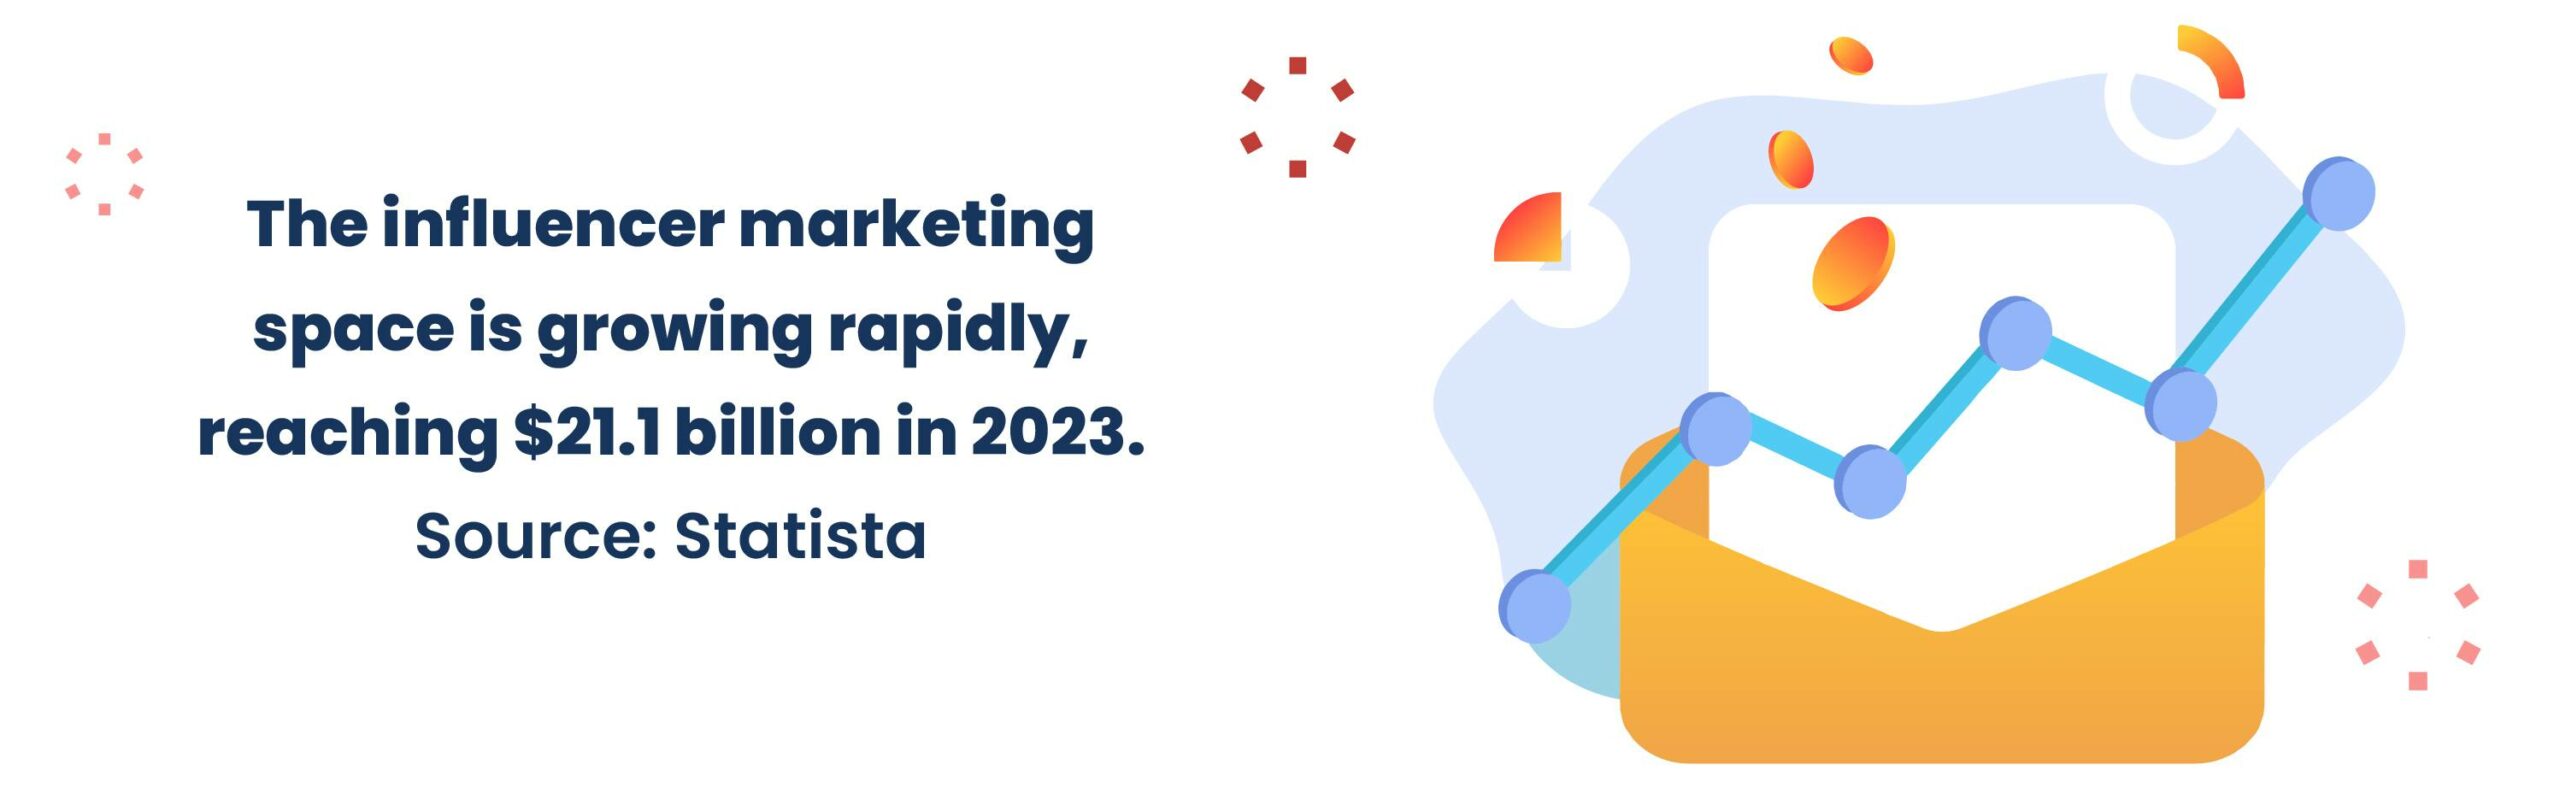 The influencer marketing space is growing rapidly, reaching $21.1 billion in 2023. source: statista